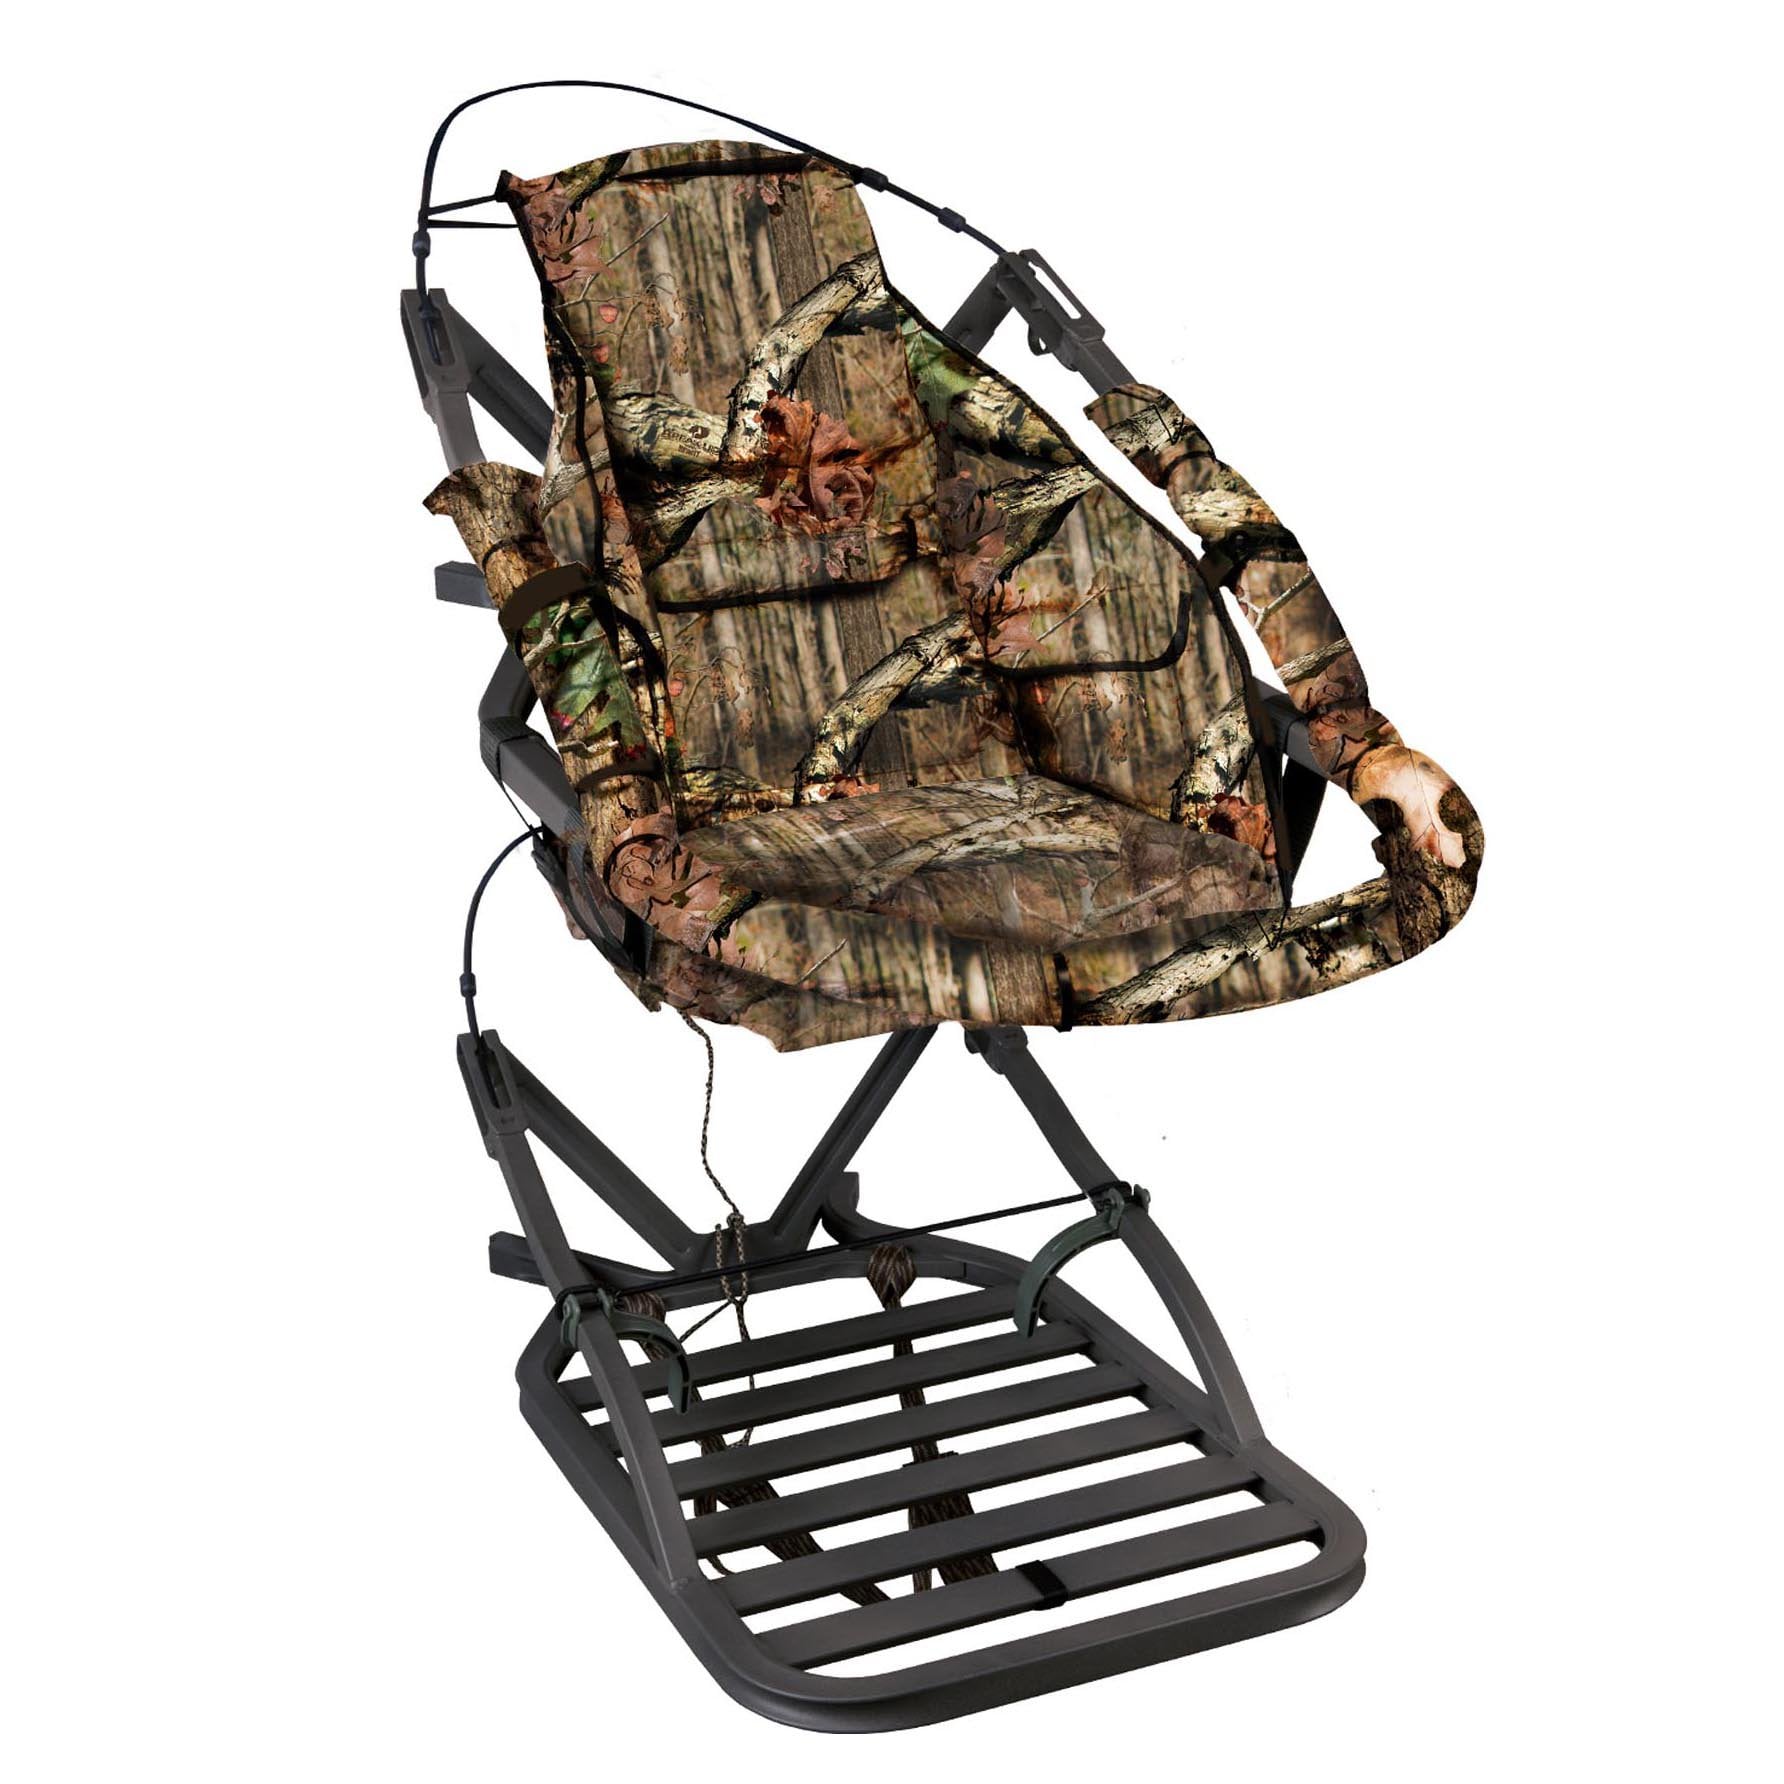 Summit 81120 Viper SD Self Climbing Treestand for sale online 